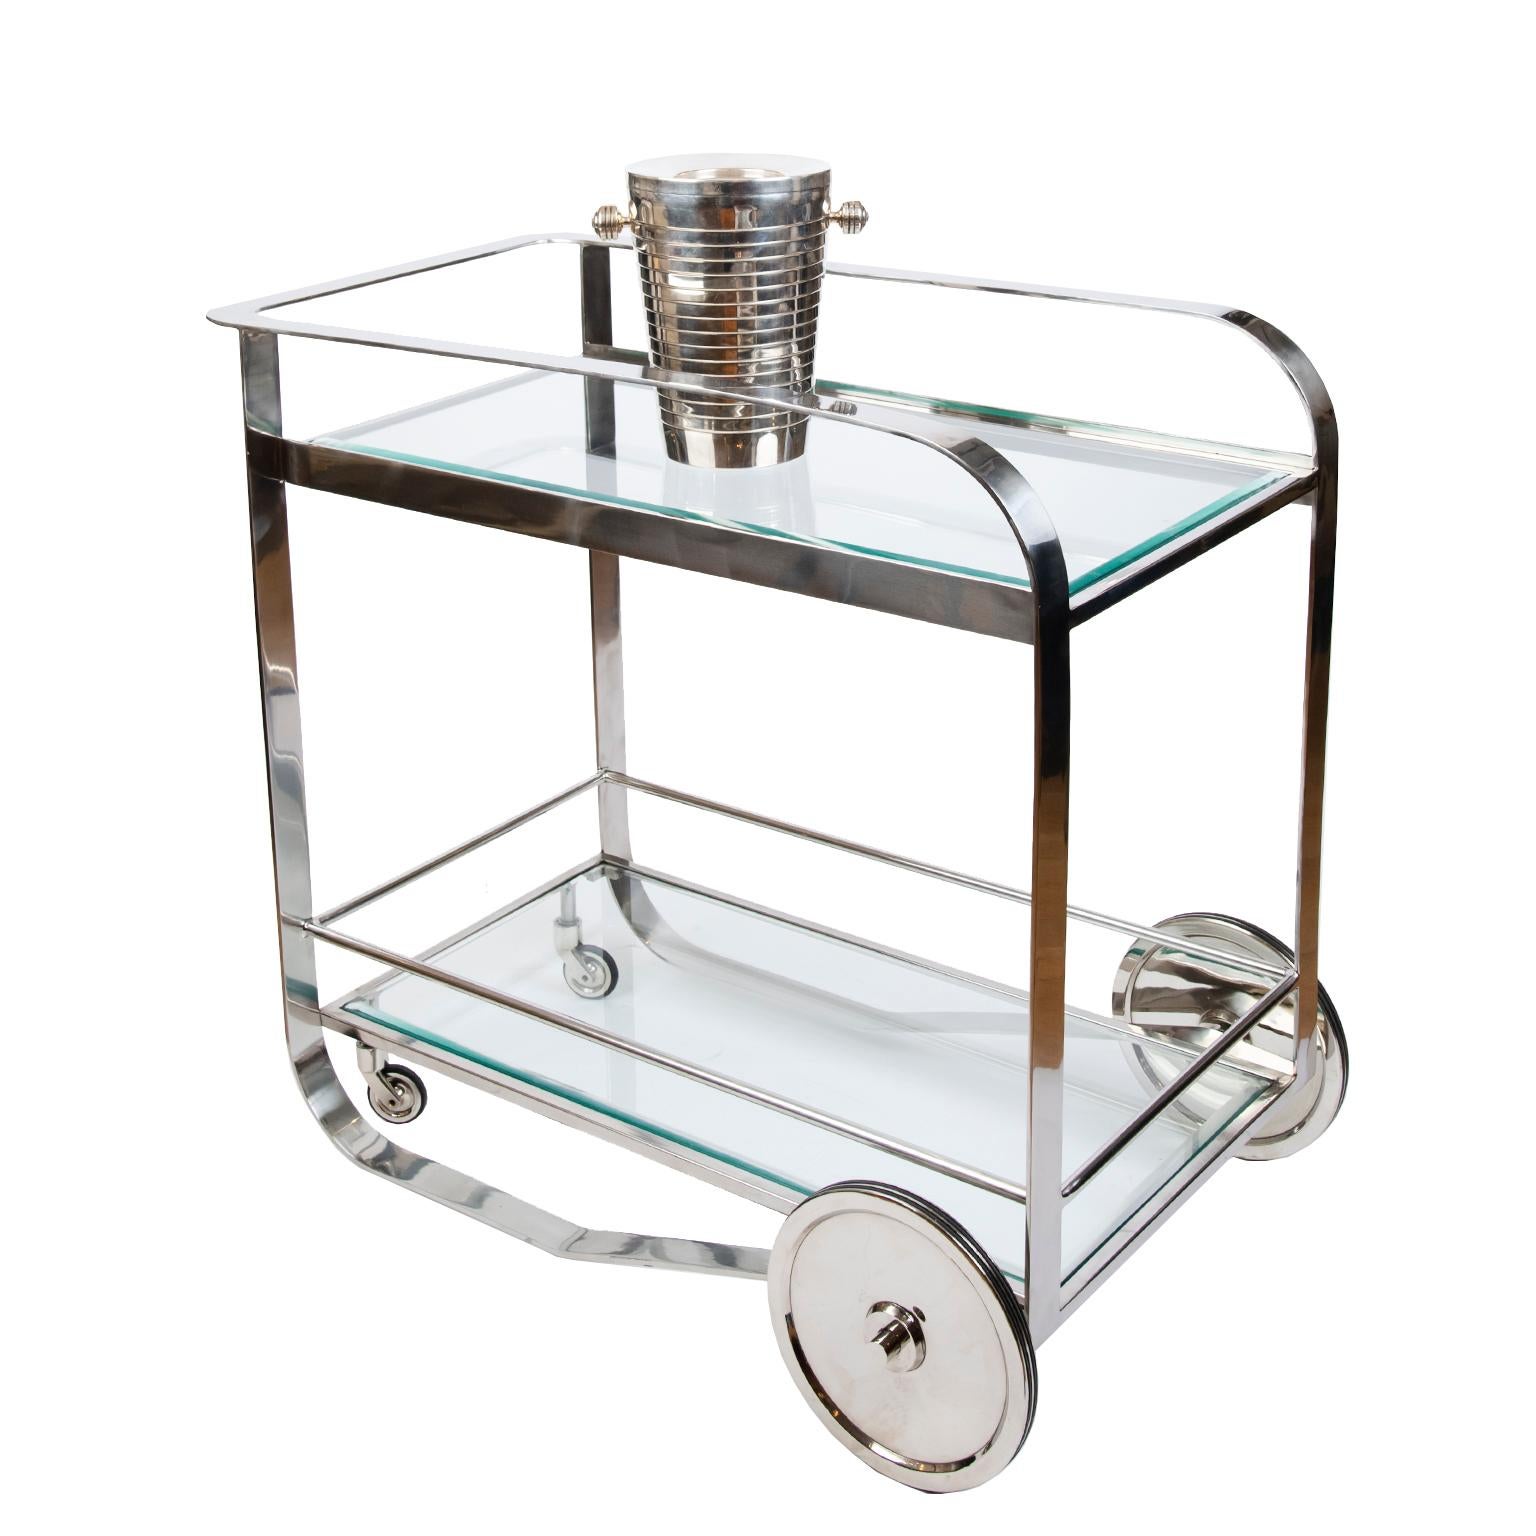 Great design and a great look describe this sleek and stylish metal bar cart beautifully made from polished steel with two tempered glass shelves.